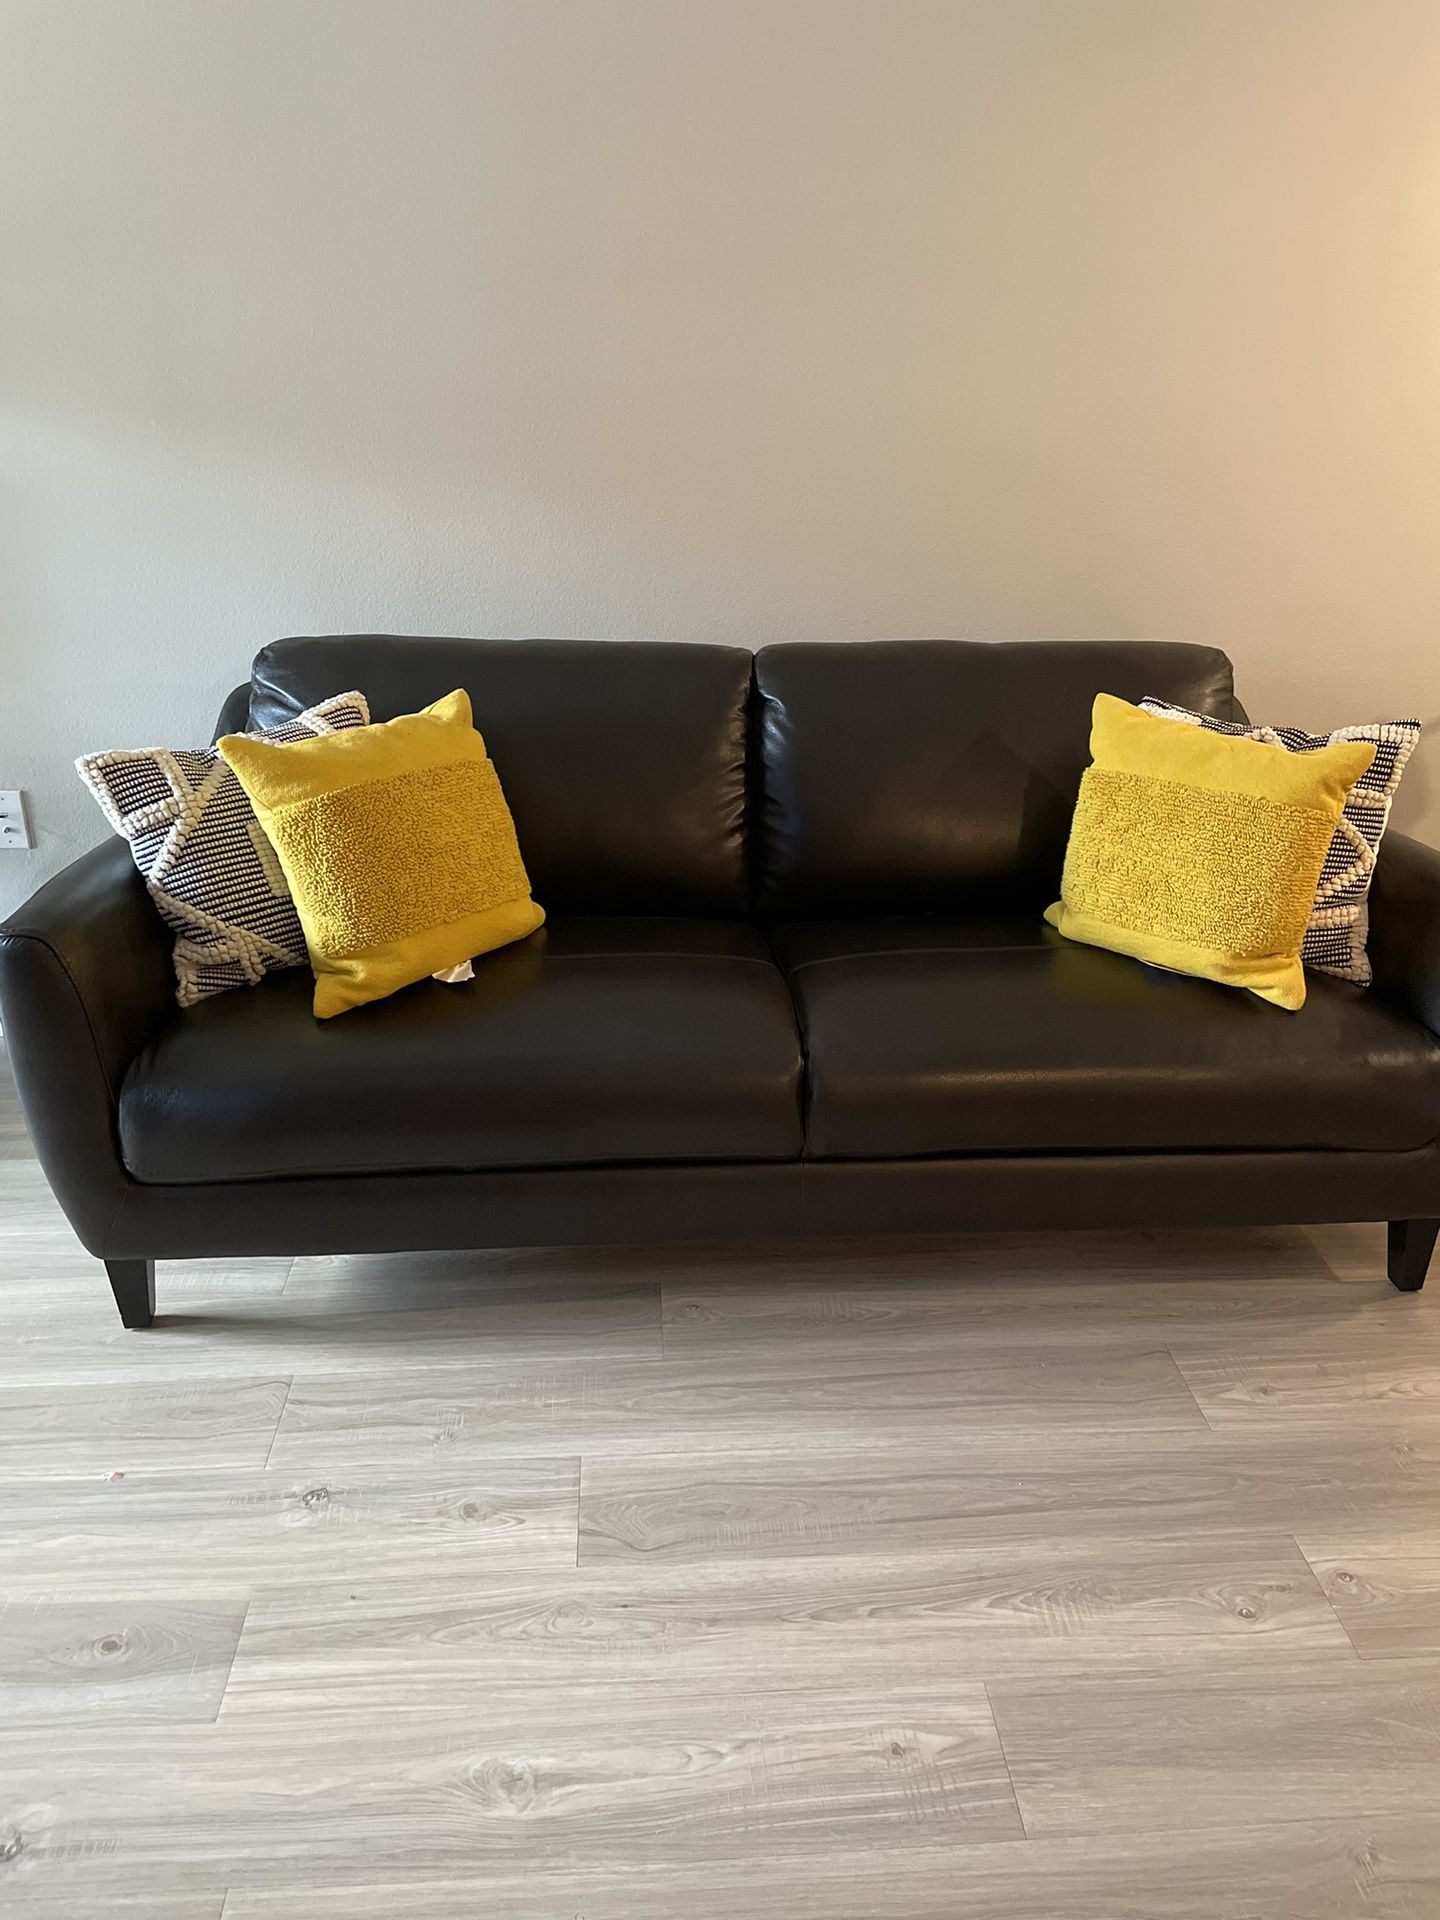 DARK BROWN LEATHER COUCH 